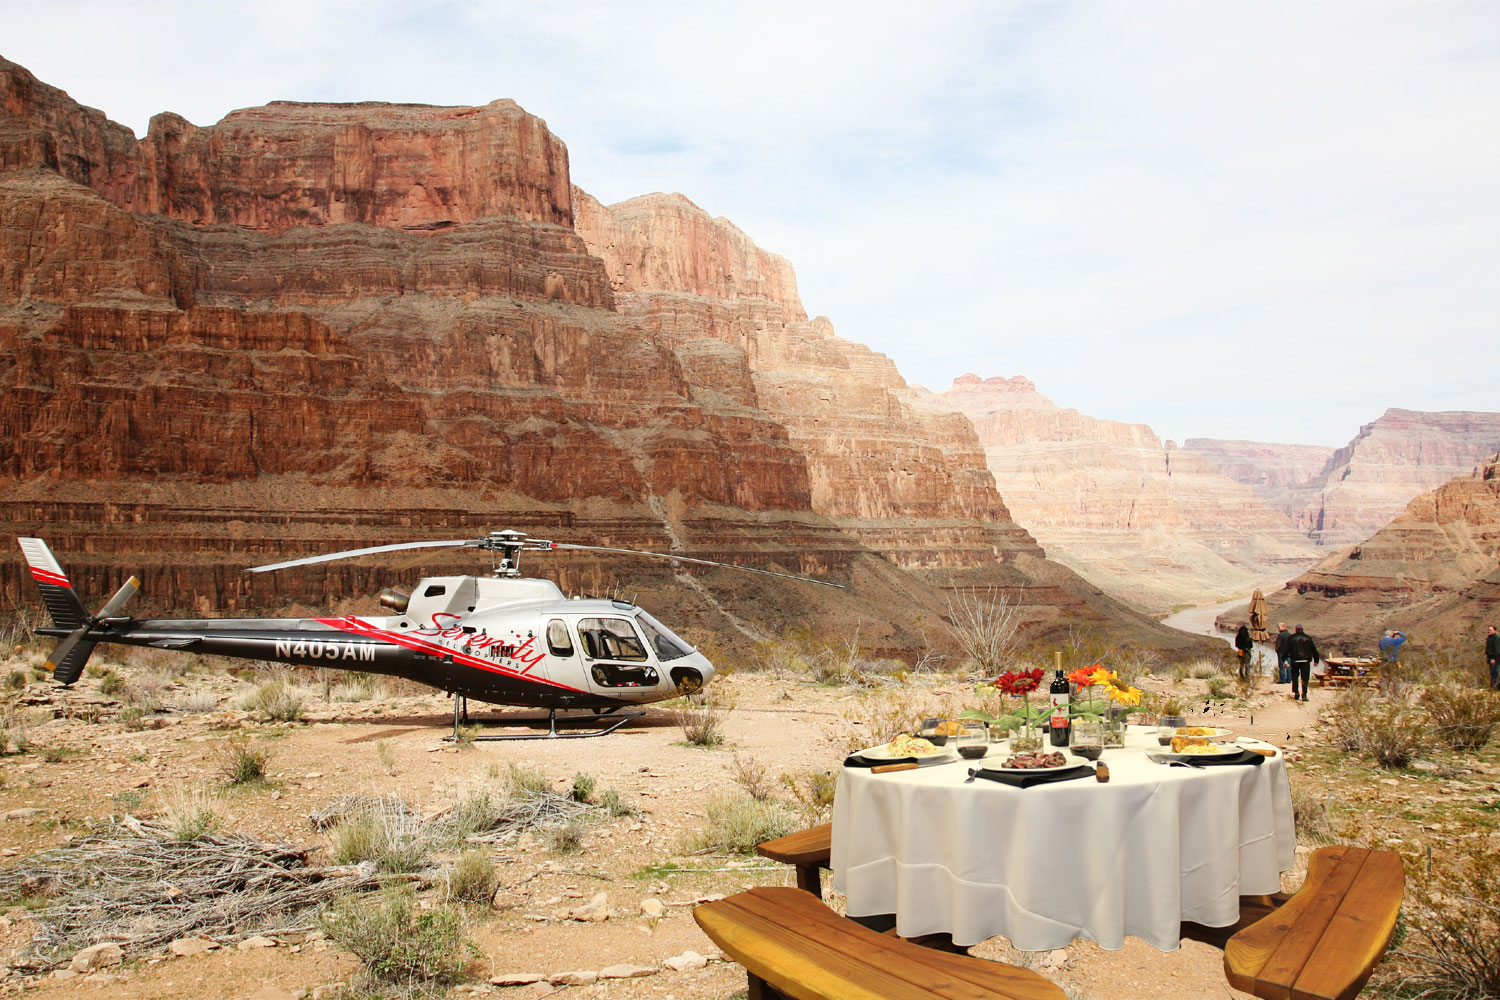 Grand Canyon Helicopter Tour Serenity Las Vegas, NV